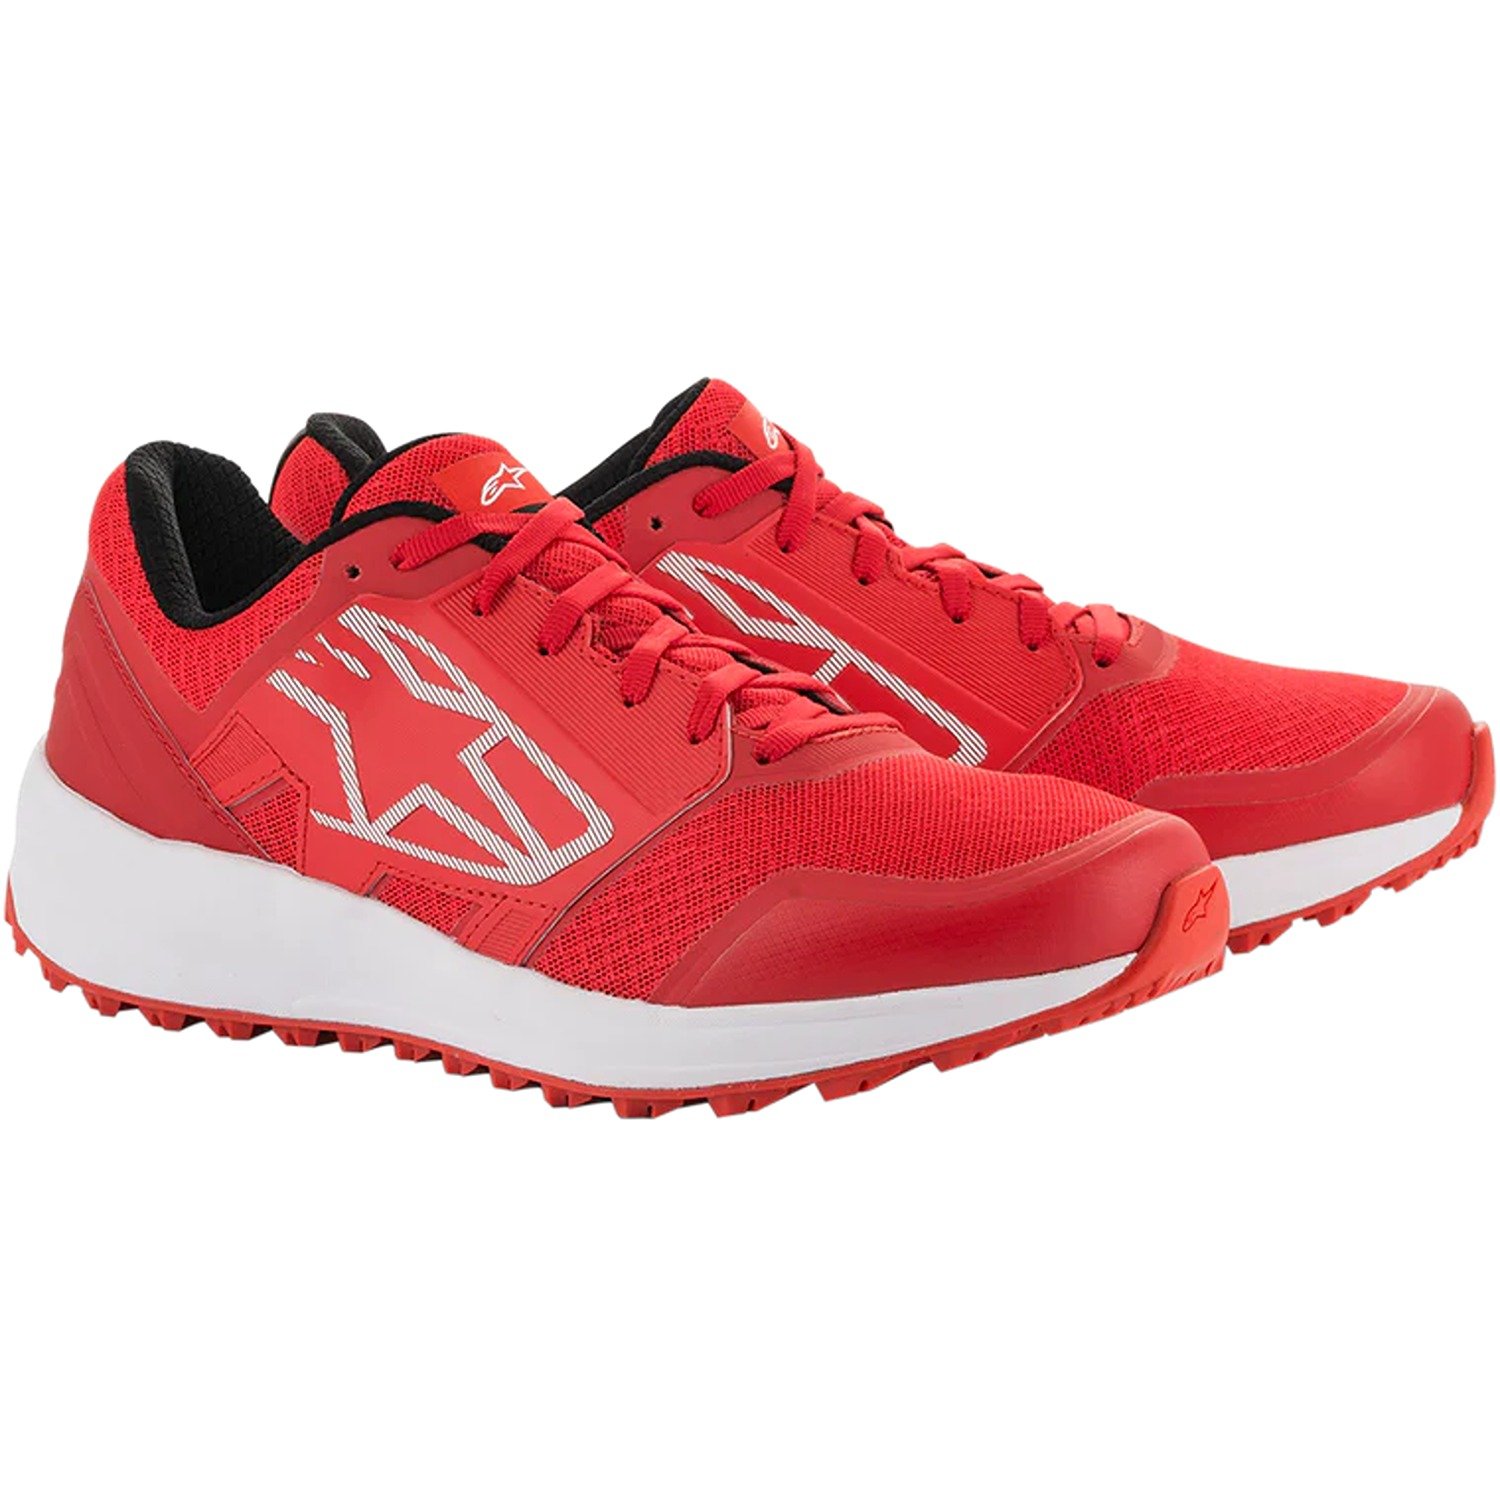 Image of EU Alpinestars Meta Trail Shoes Red White Taille US 95